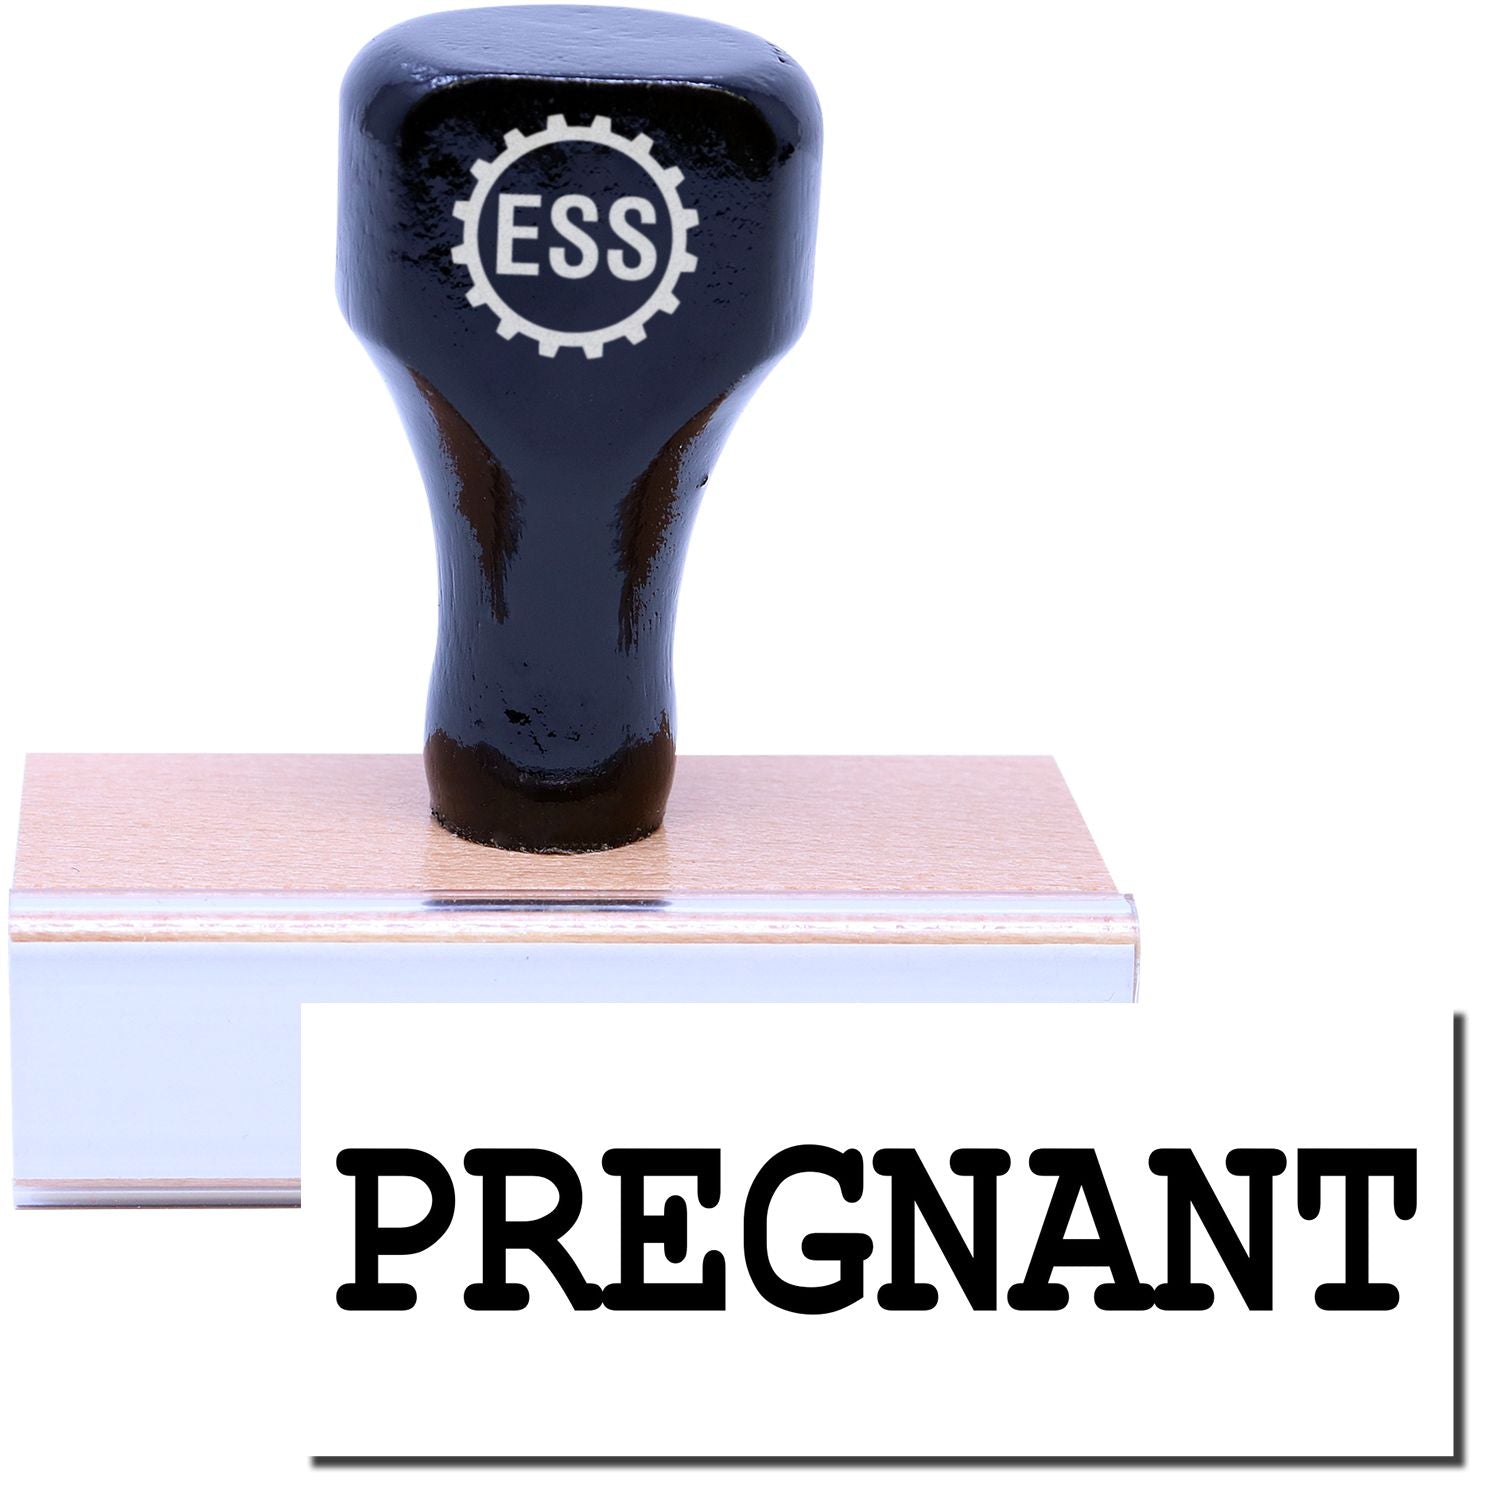 A stock office rubber stamp with a stamped image showing how the text "PREGNANT" in a large font is displayed after stamping.